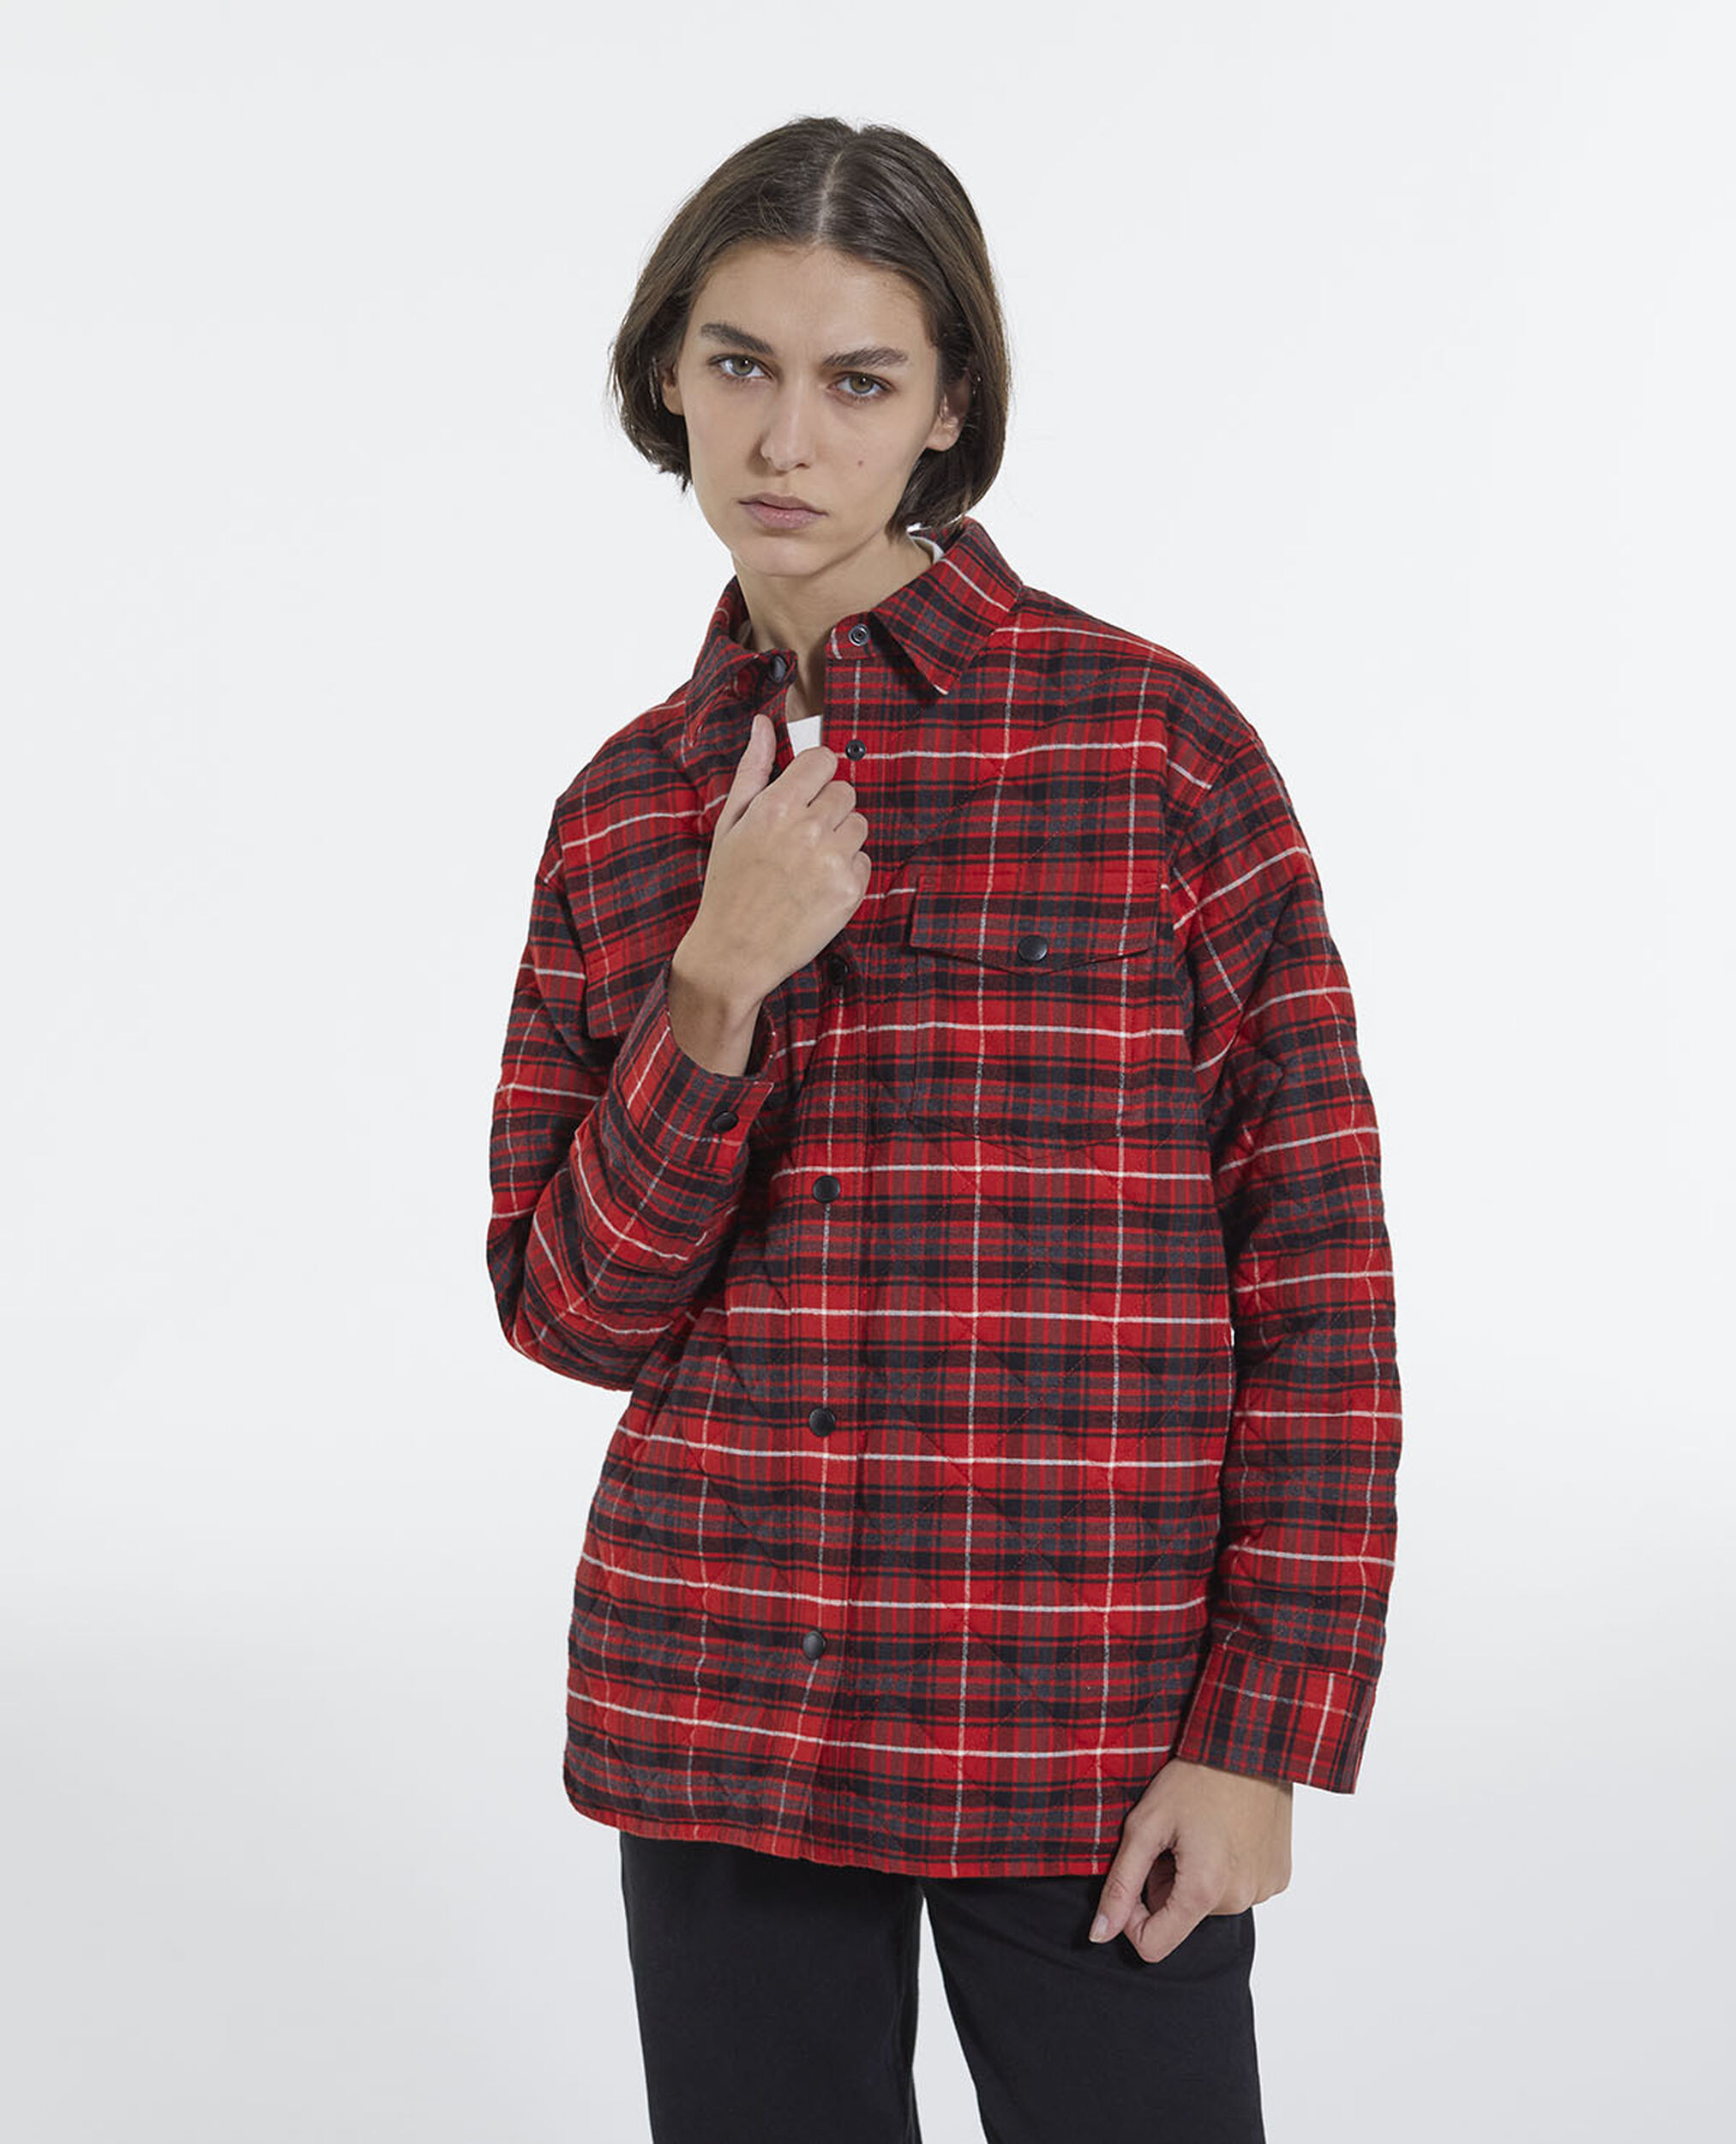 Black and red oversized checked shirt, RED / BLACK, hi-res image number null